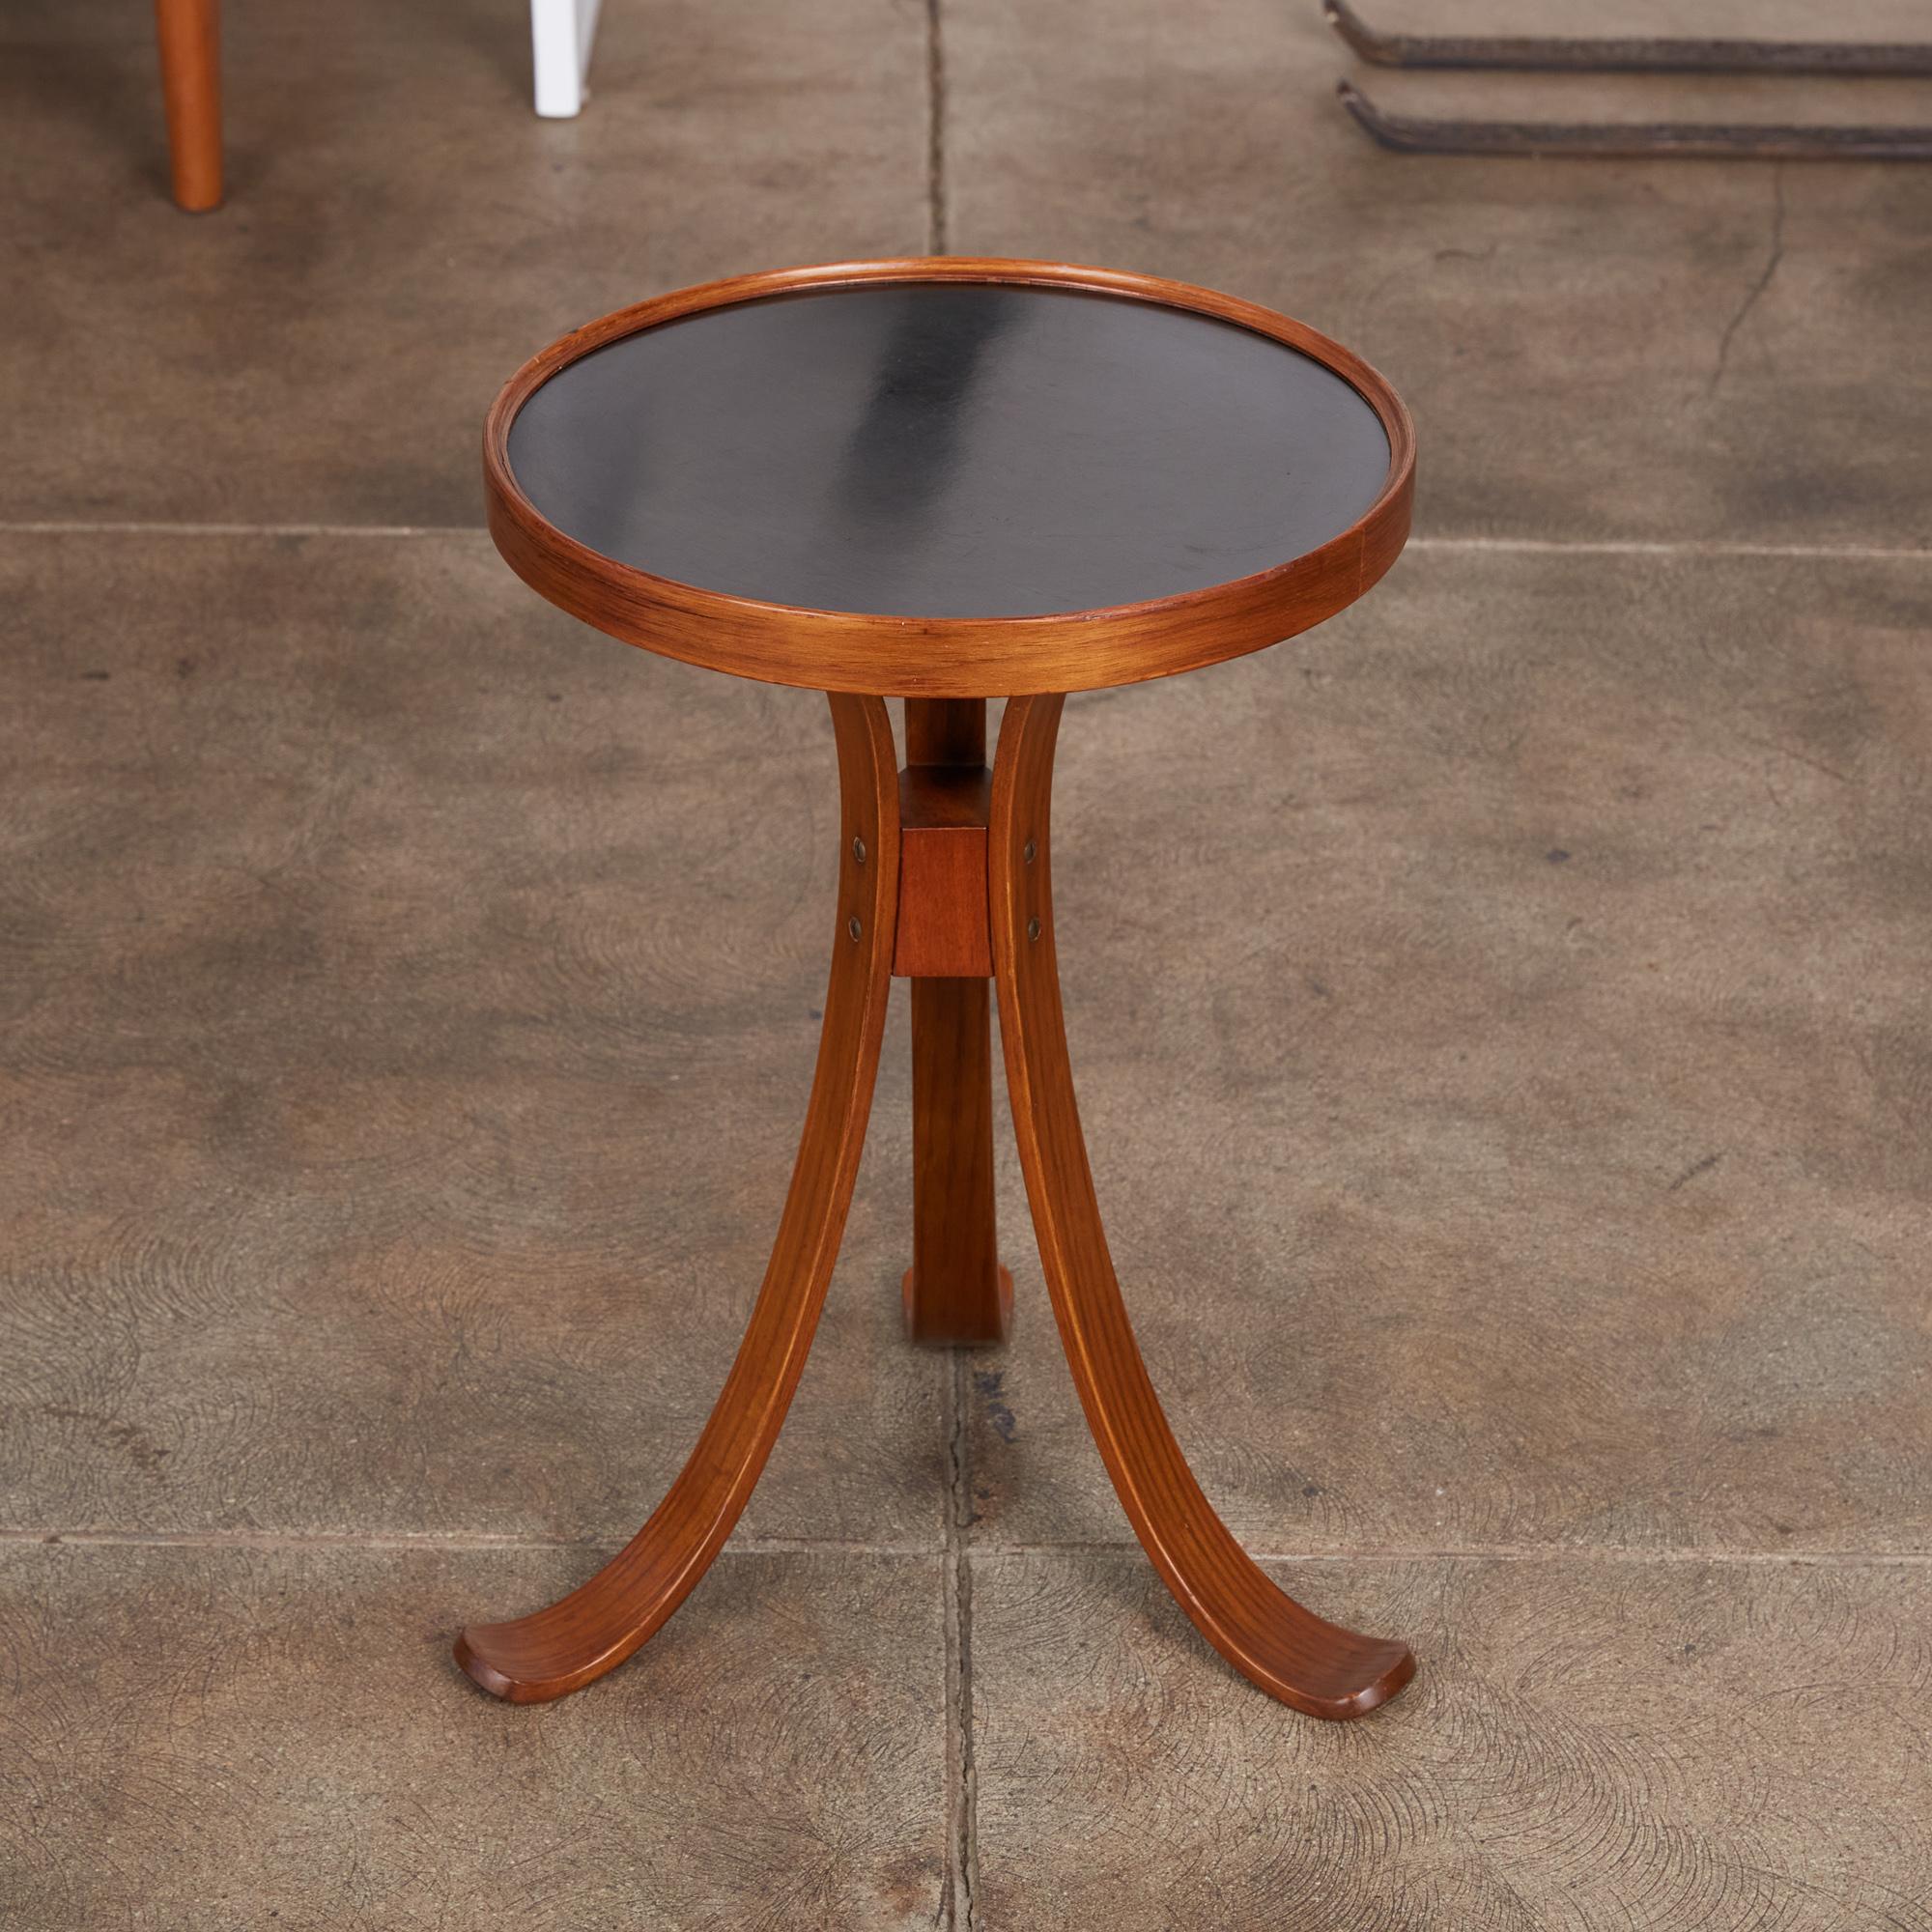 A tripod side table by Edward Wormley for Dunbar, c.1960s. The table features an oiled mahogany frame, curved bentwood tripod legs and a round black laminate top with raised edge. This small table is perfect for drinks or anywhere a side table with